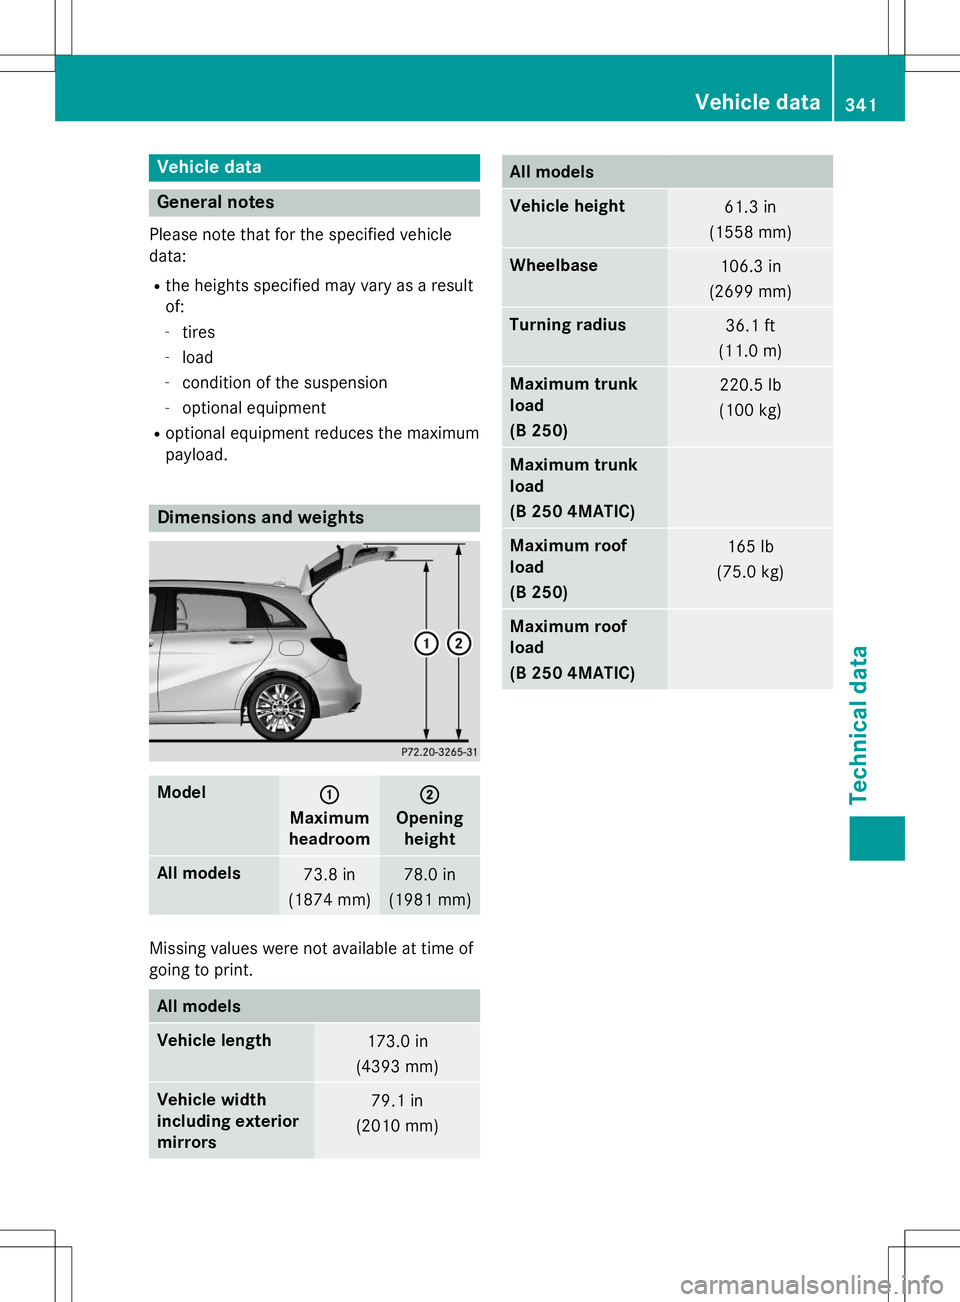 MERCEDES-BENZ B-CLASS SPORTS 2015  Owners Manual Vehicle data
General notes
Please note that for the specified vehicle 
data:R the heights specified may vary as a resultof:
- tires
- load
- condition of the suspension
- optional equipment
R optional